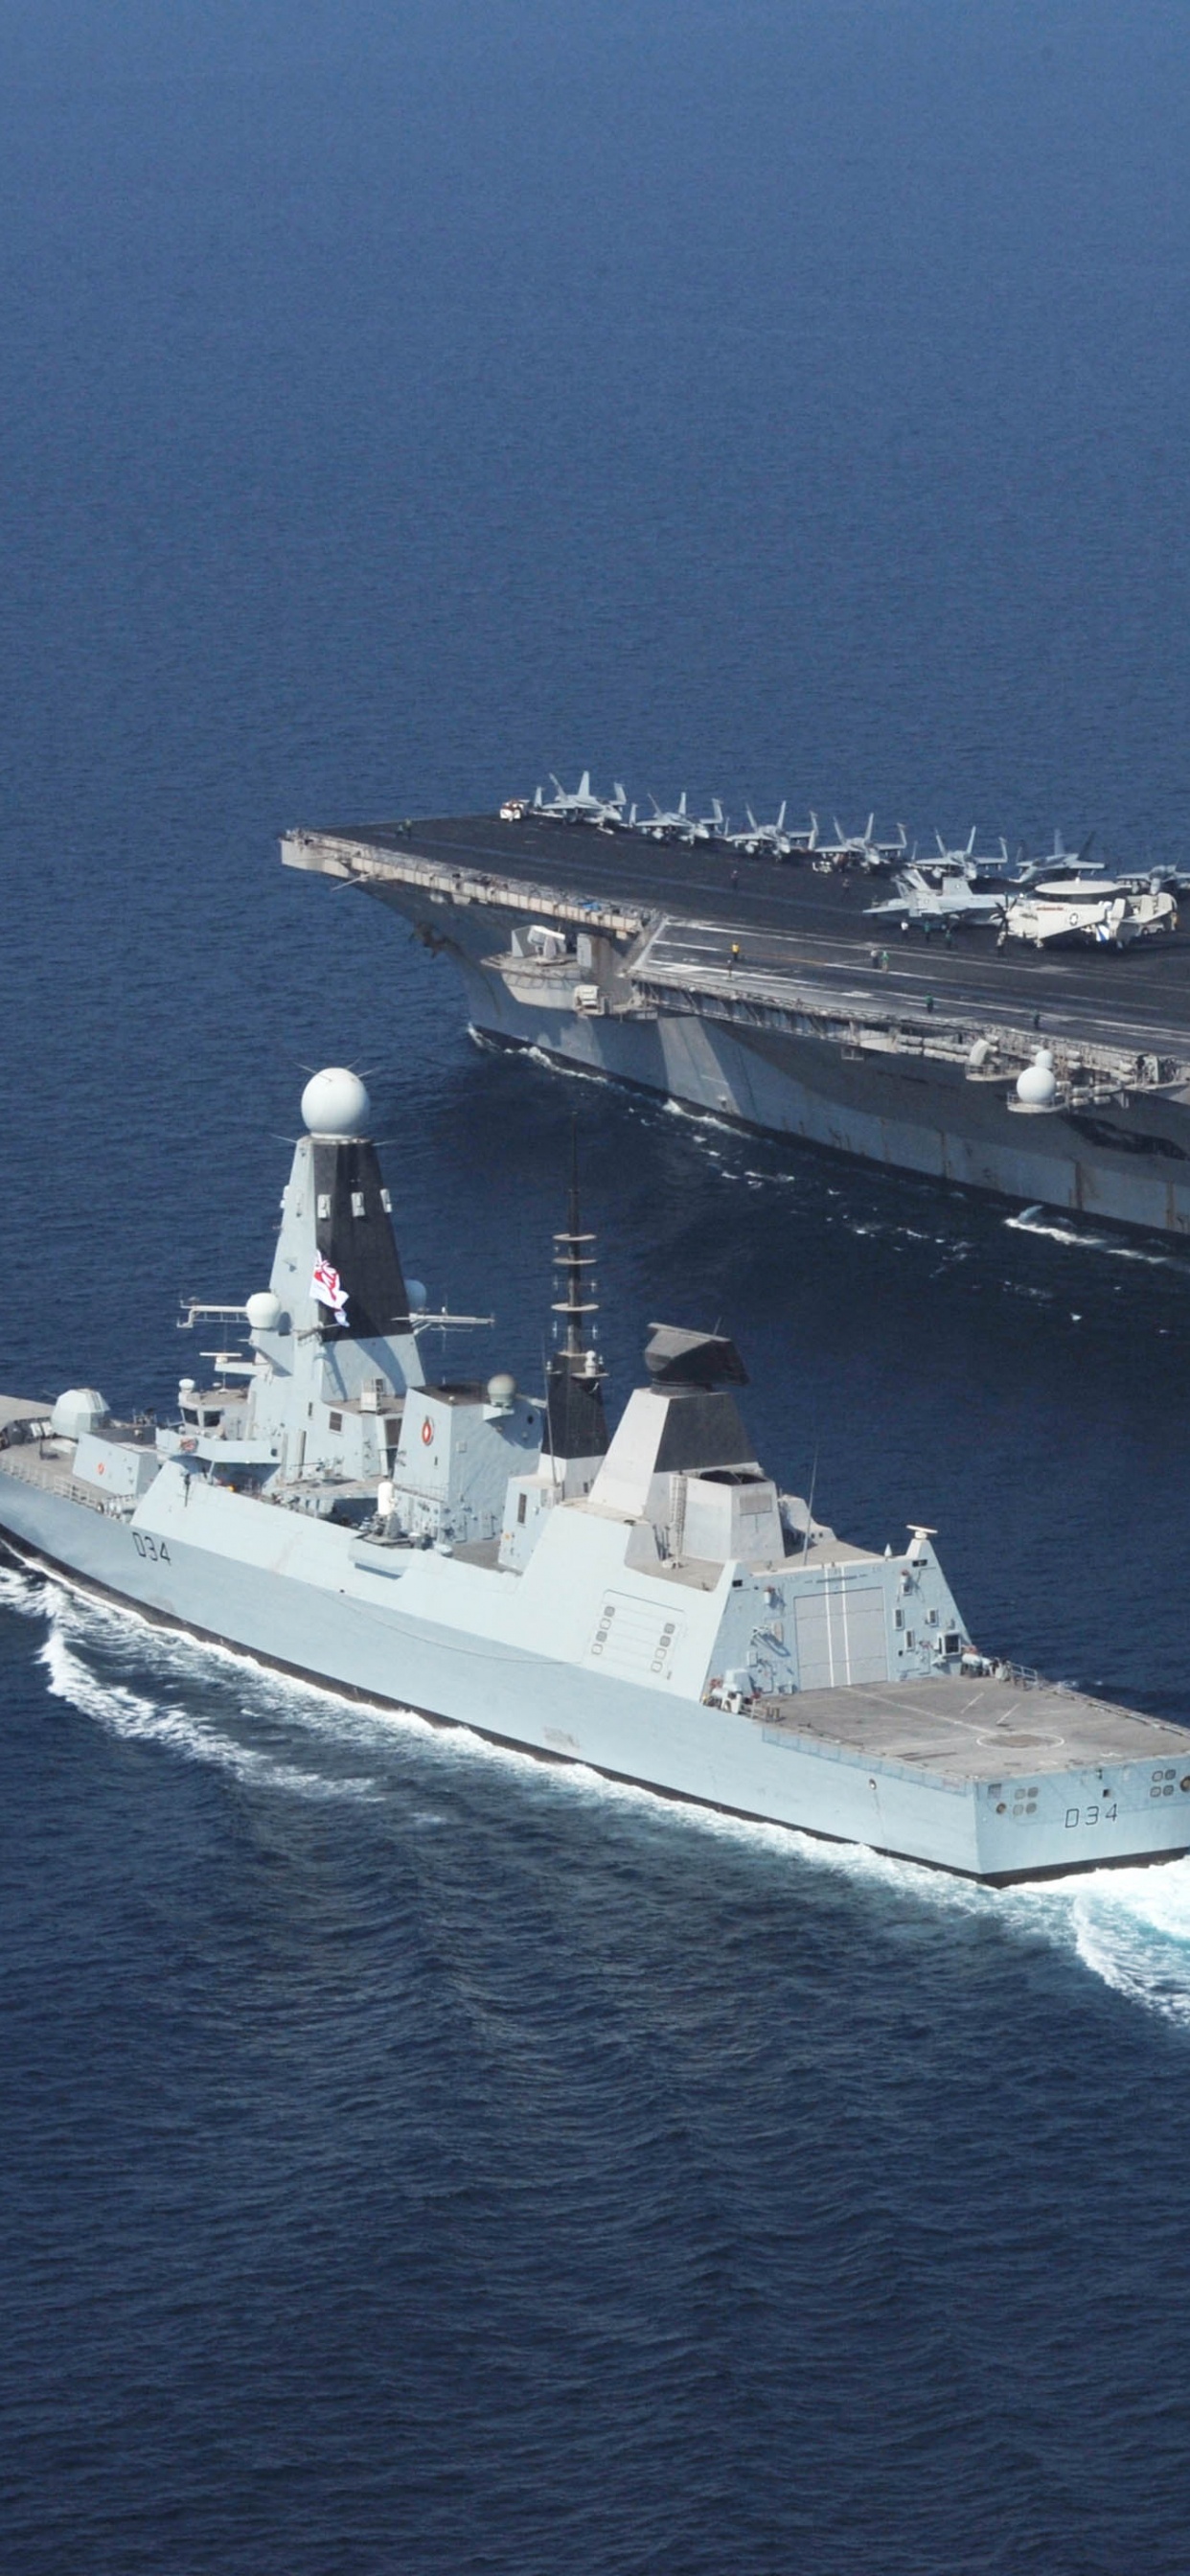 HMS Diamond, Royal Navy, Aircraft Carrier, Destroyer, Warship. Wallpaper in 1242x2688 Resolution